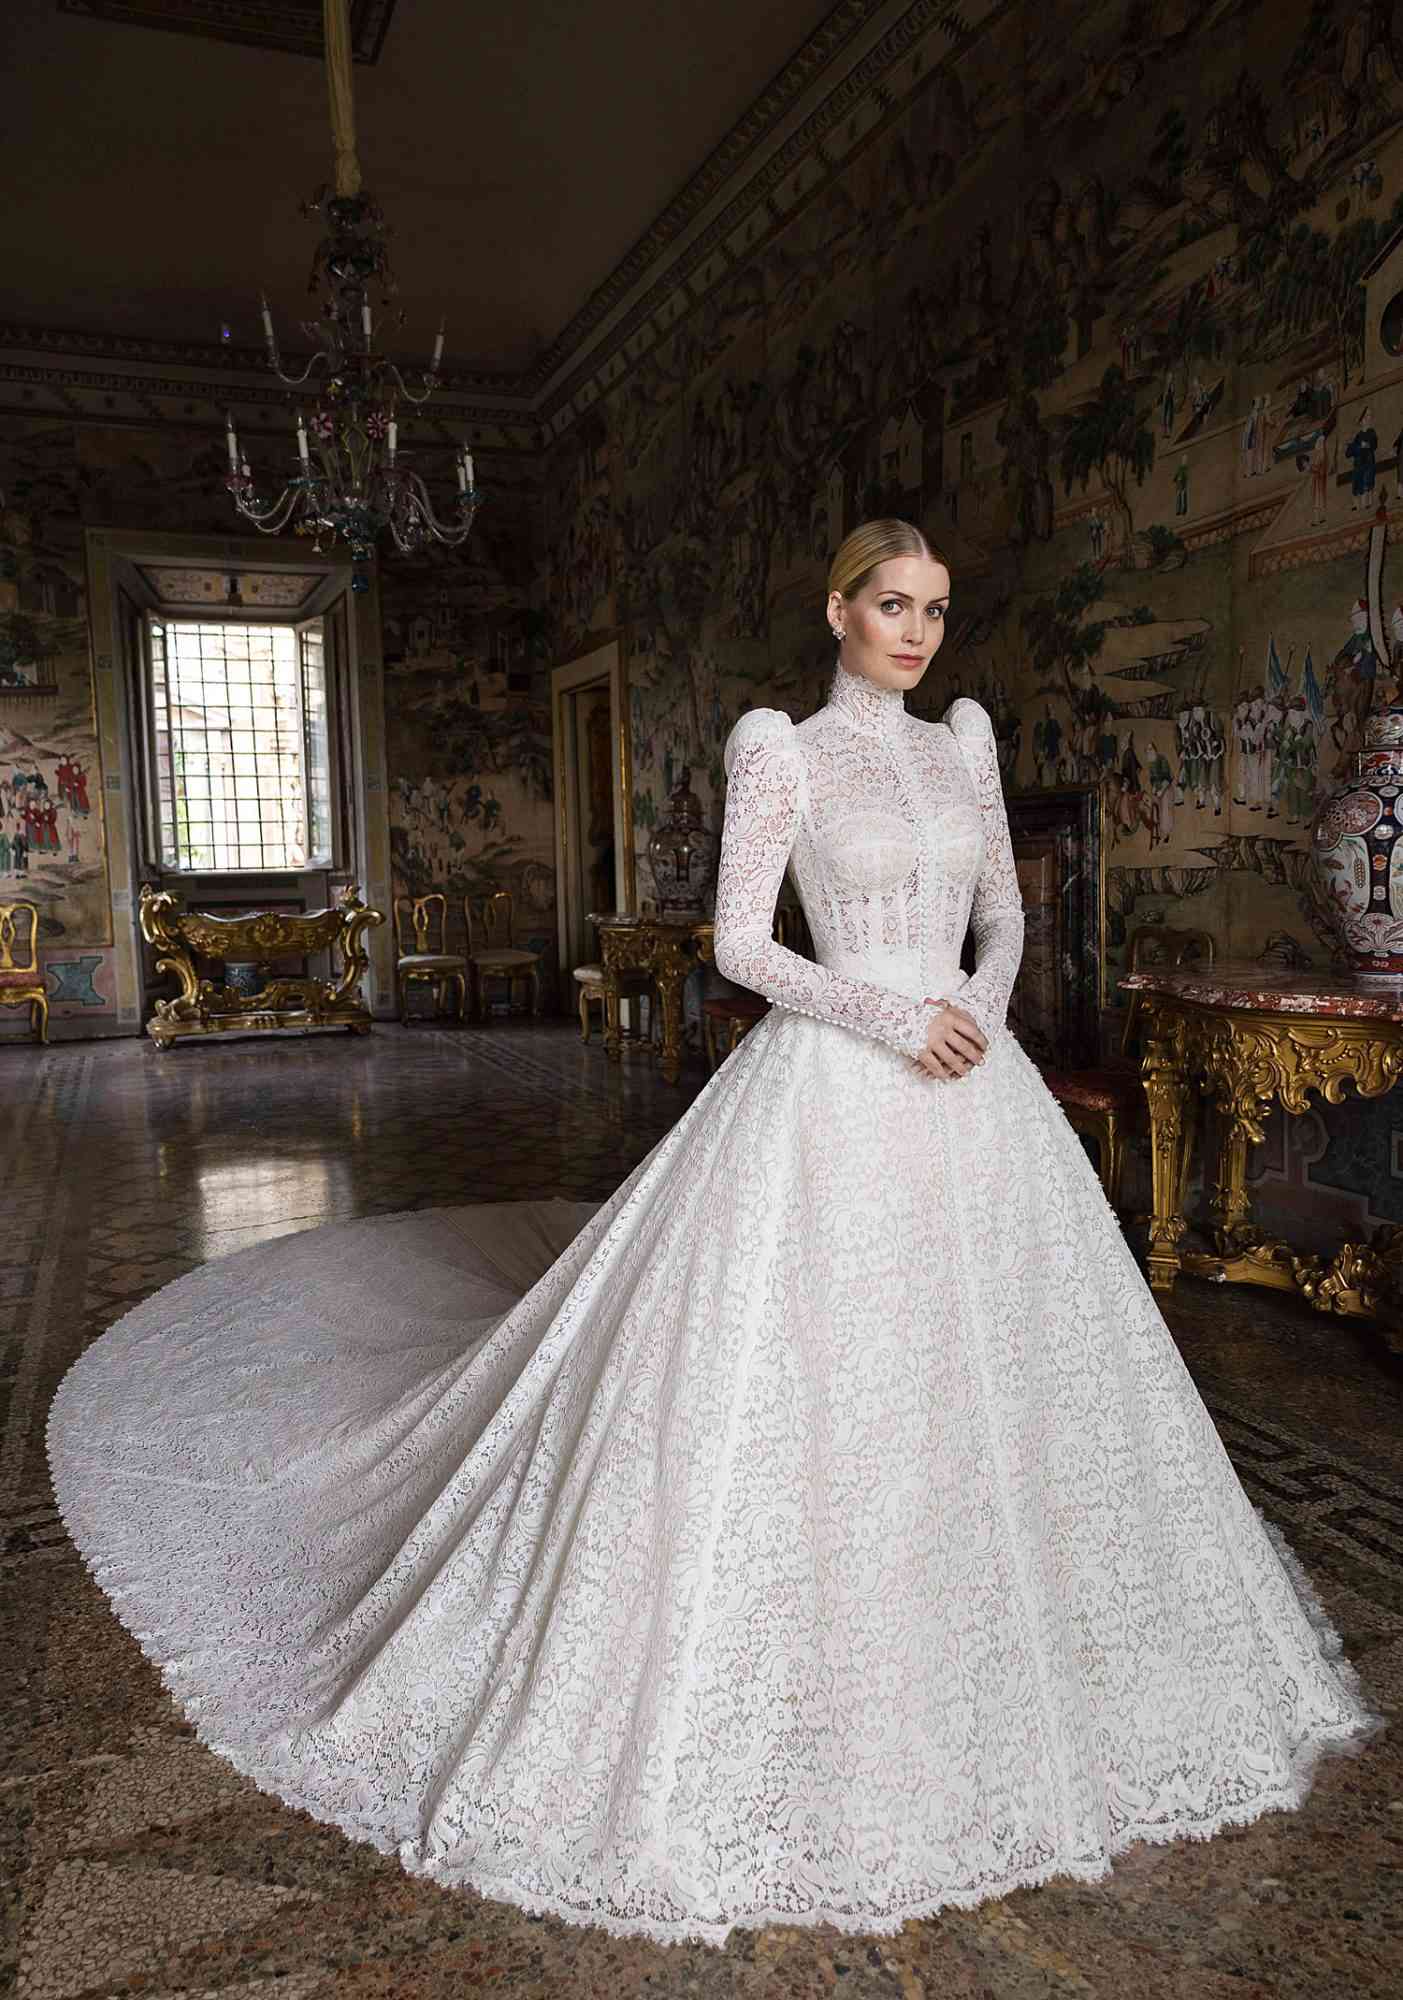 Lady Kitty Spencer Wedding Gown